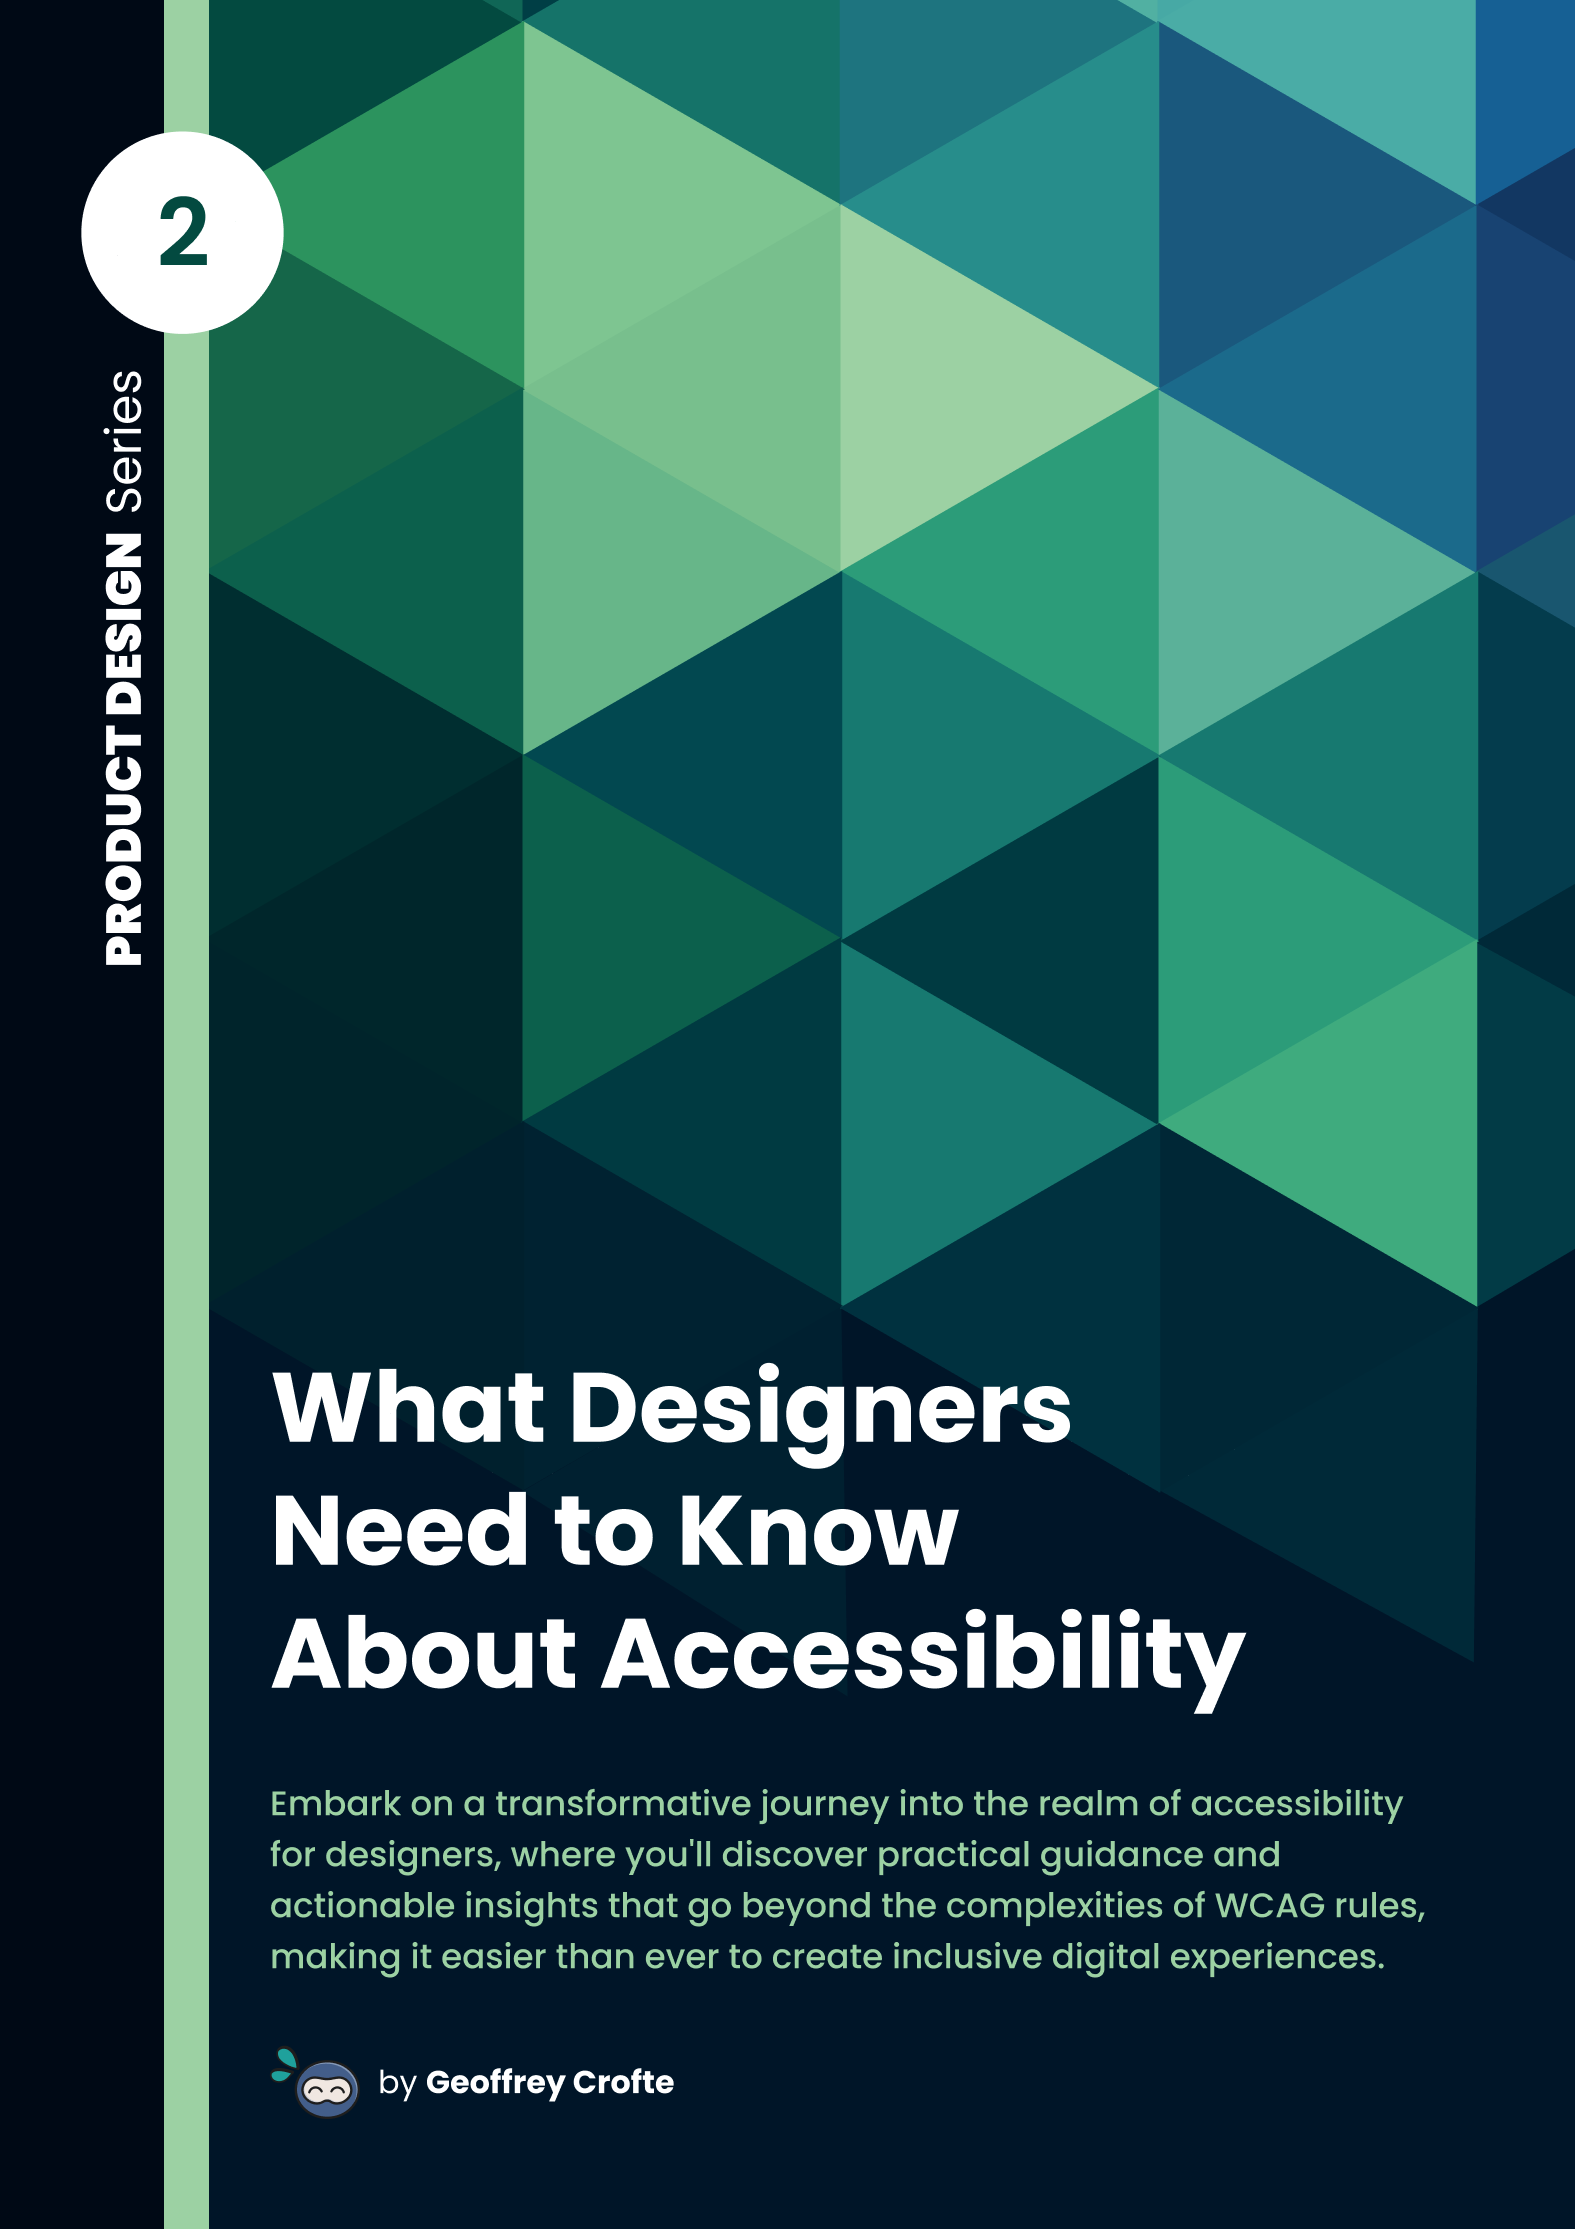 What Designers Need to Know About Accessibility